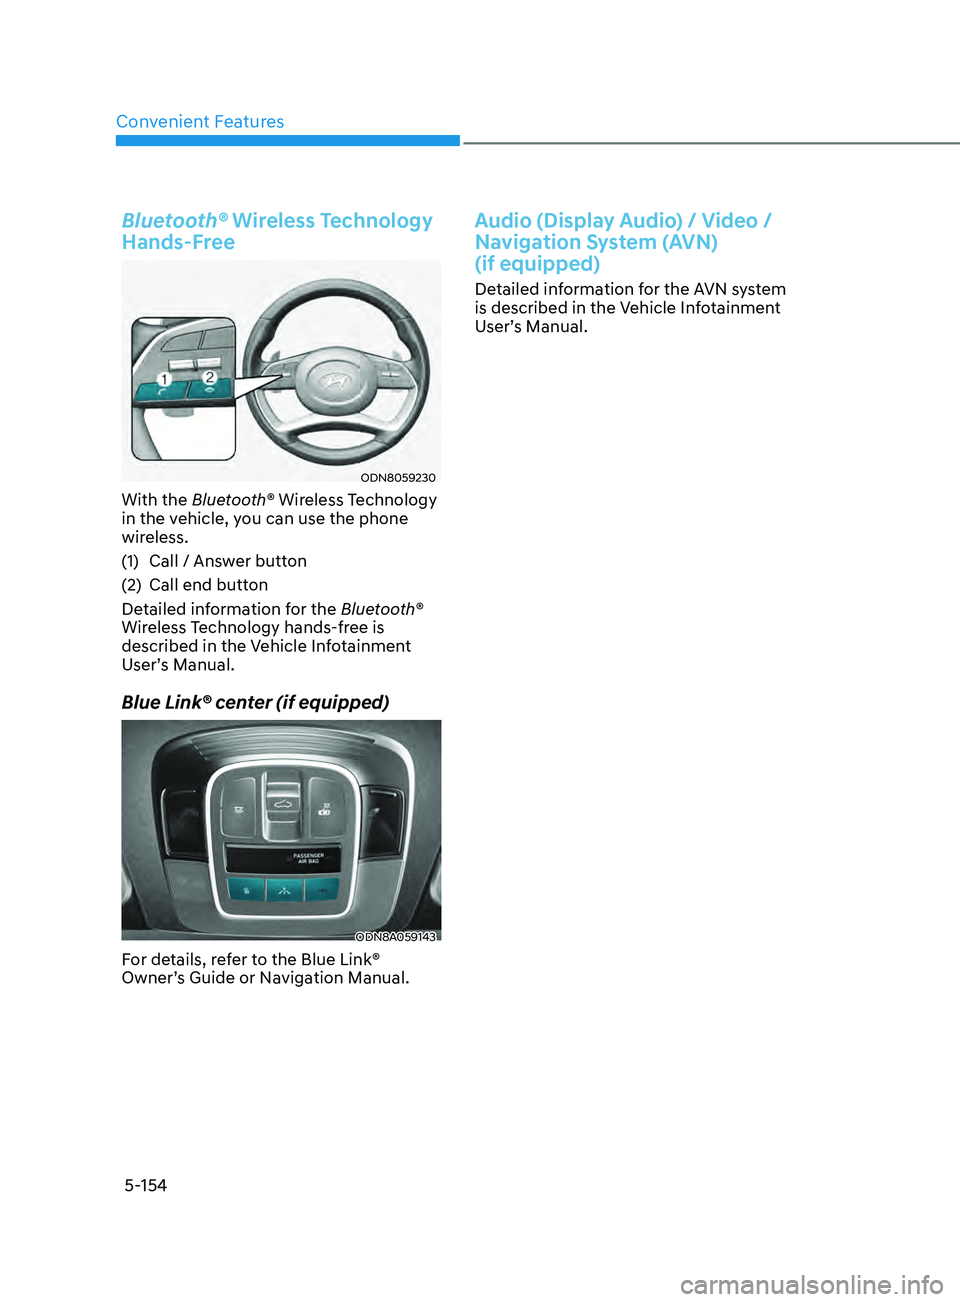 HYUNDAI SONATA 2021  Owners Manual Convenient Features
5-154
Bluetooth® Wireless Technology 
Hands-Free
ODN8059230
With the Bluetooth® Wireless Technology 
in the vehicle, you can use the phone 
wireless.
(1) 
Call / Ans
 wer button
